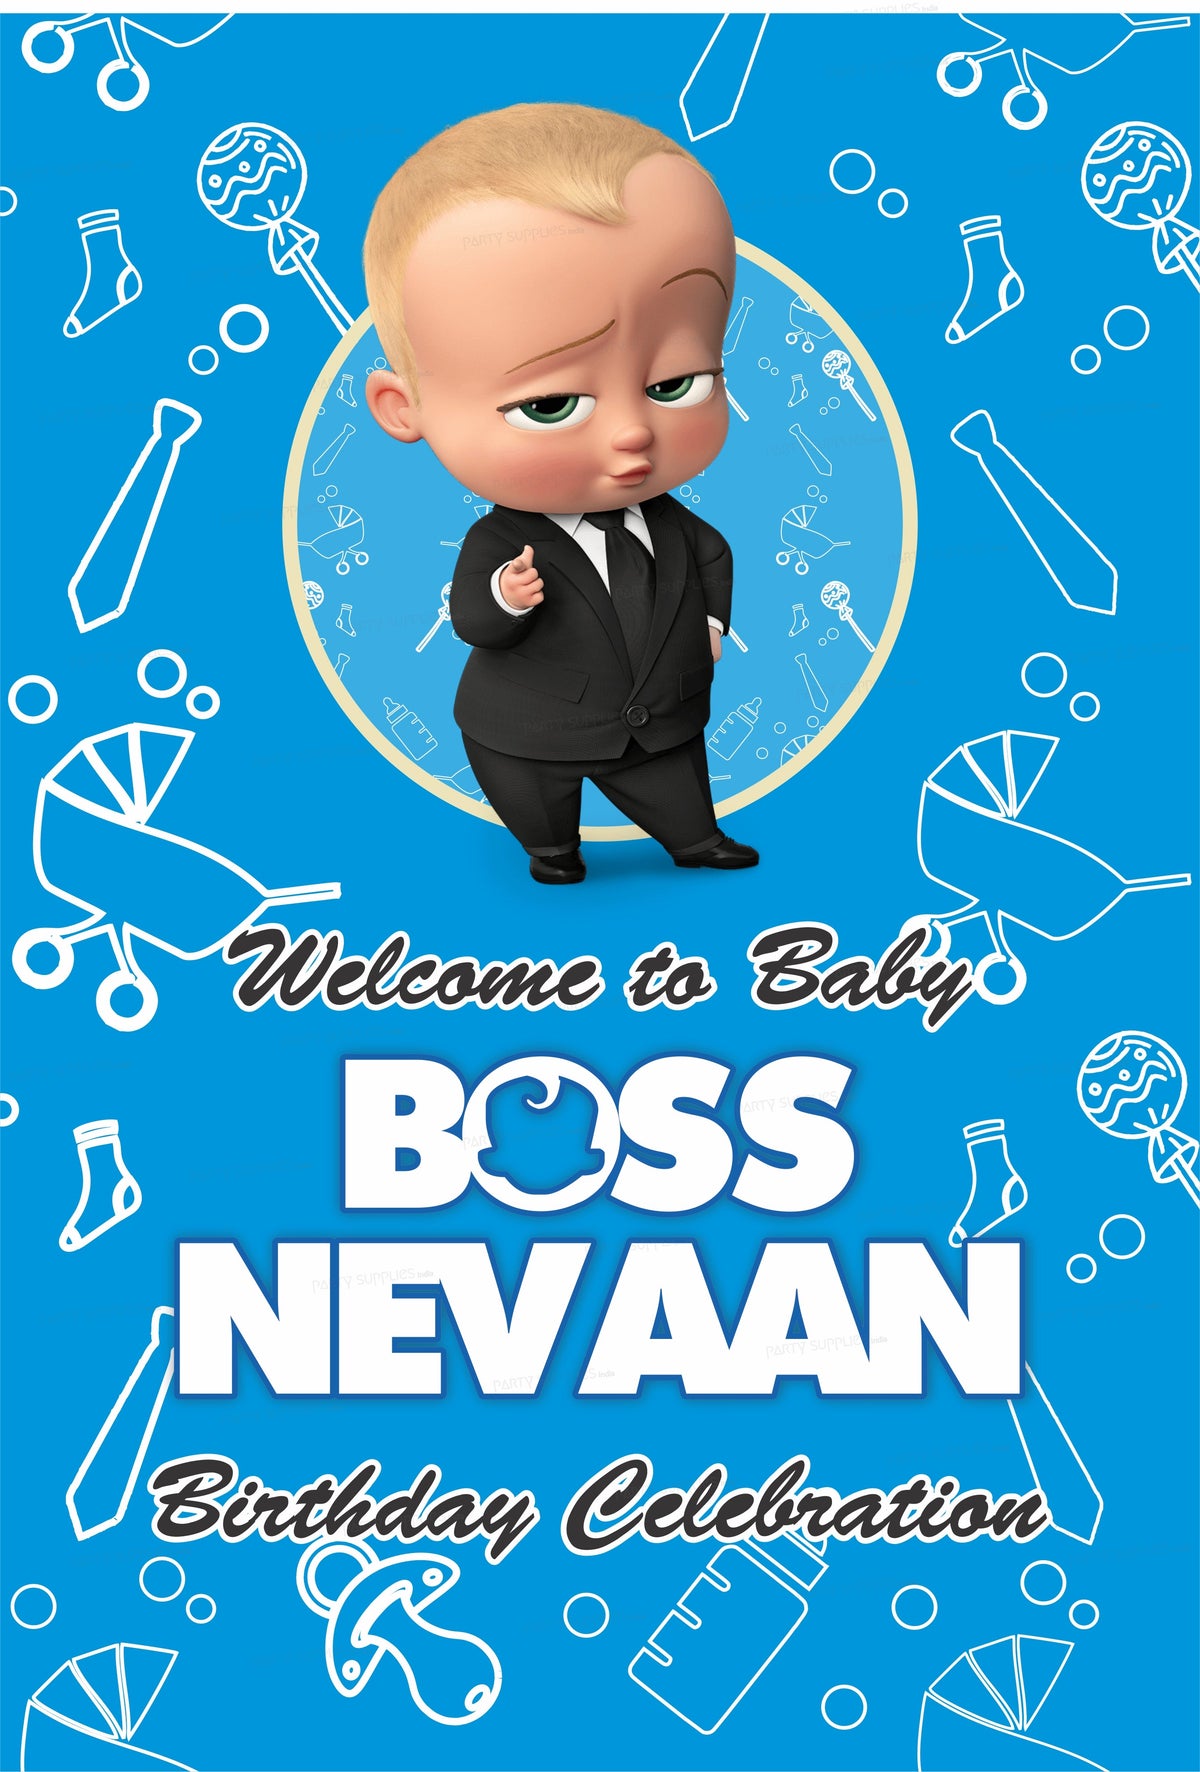 PSI Boss Baby Theme Customized Welcome Board